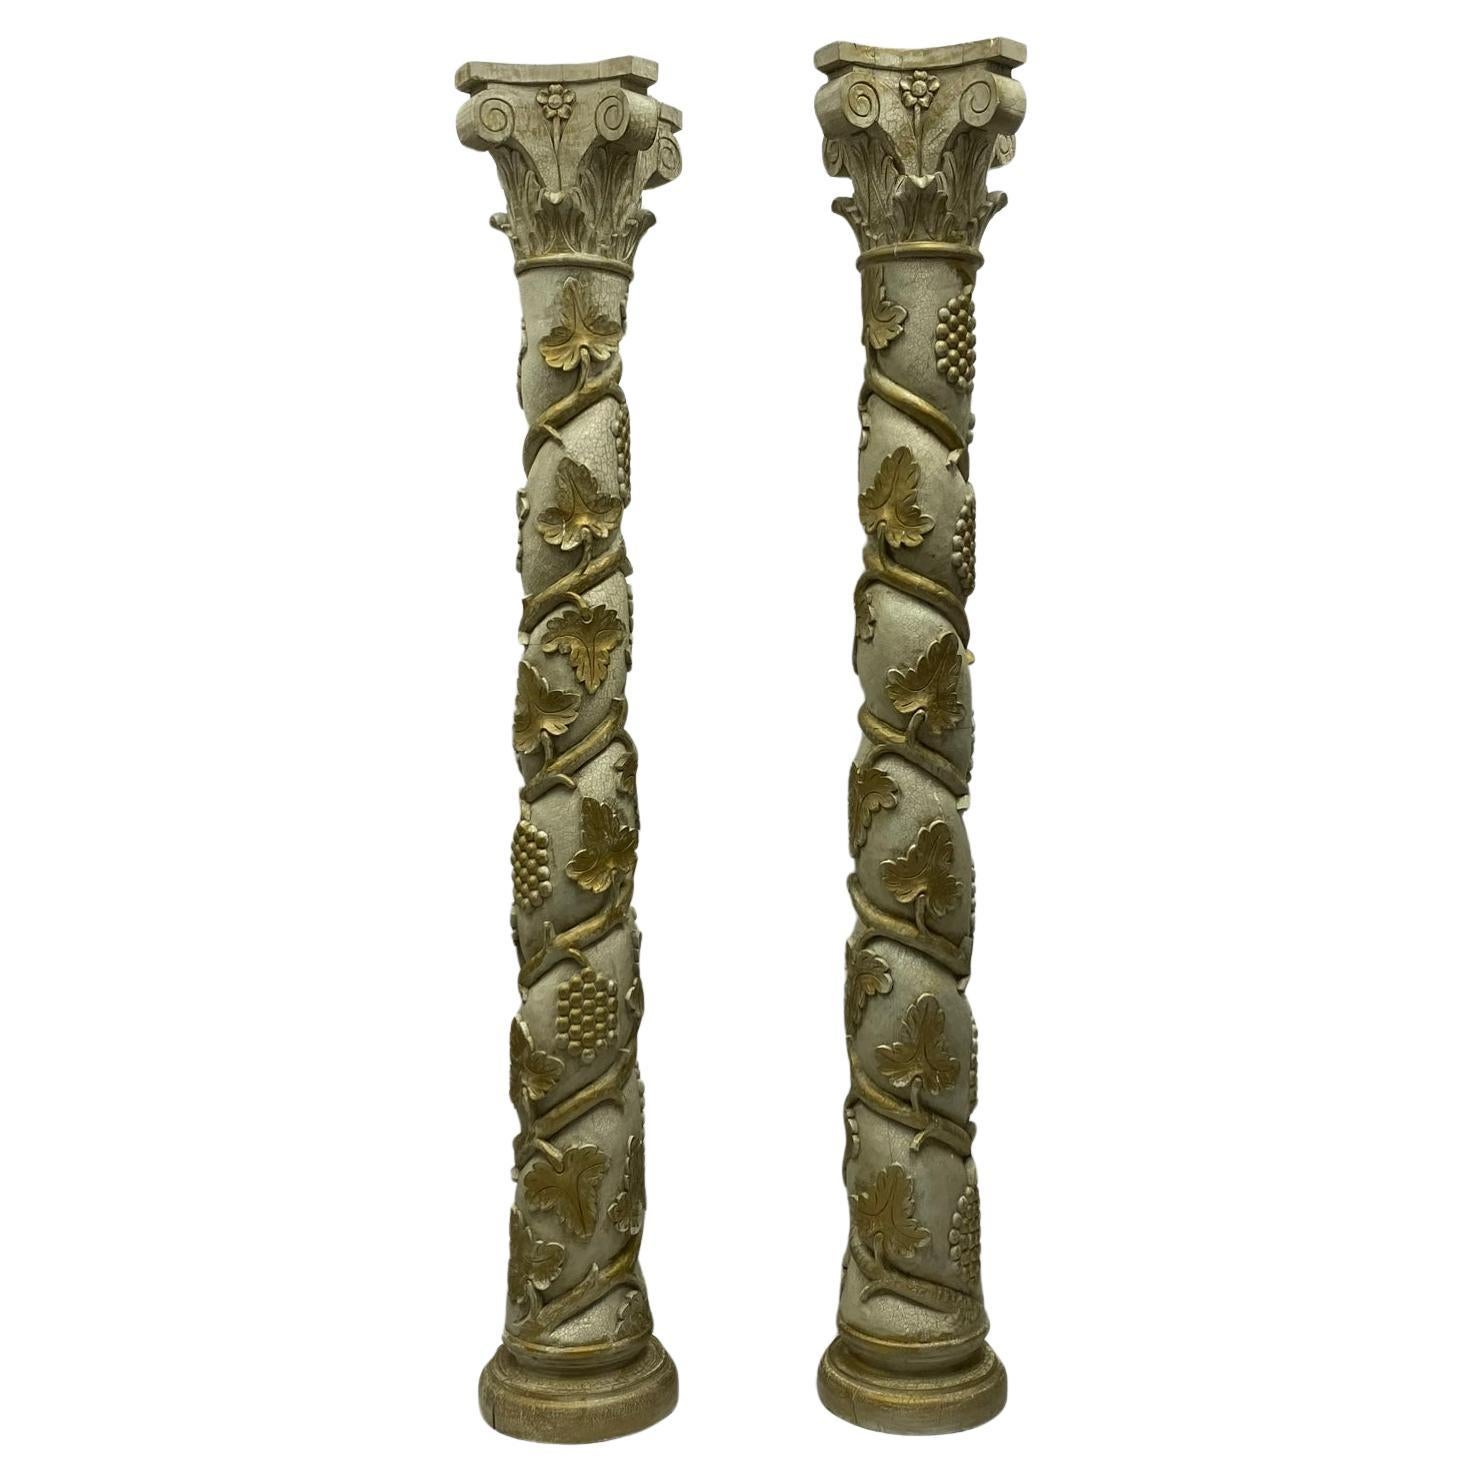 This is a monumental Italian neo-classical style carved and painted columns with cascading grapes and vines. They are most likely mid-century pieces and do have age appropriate wear.